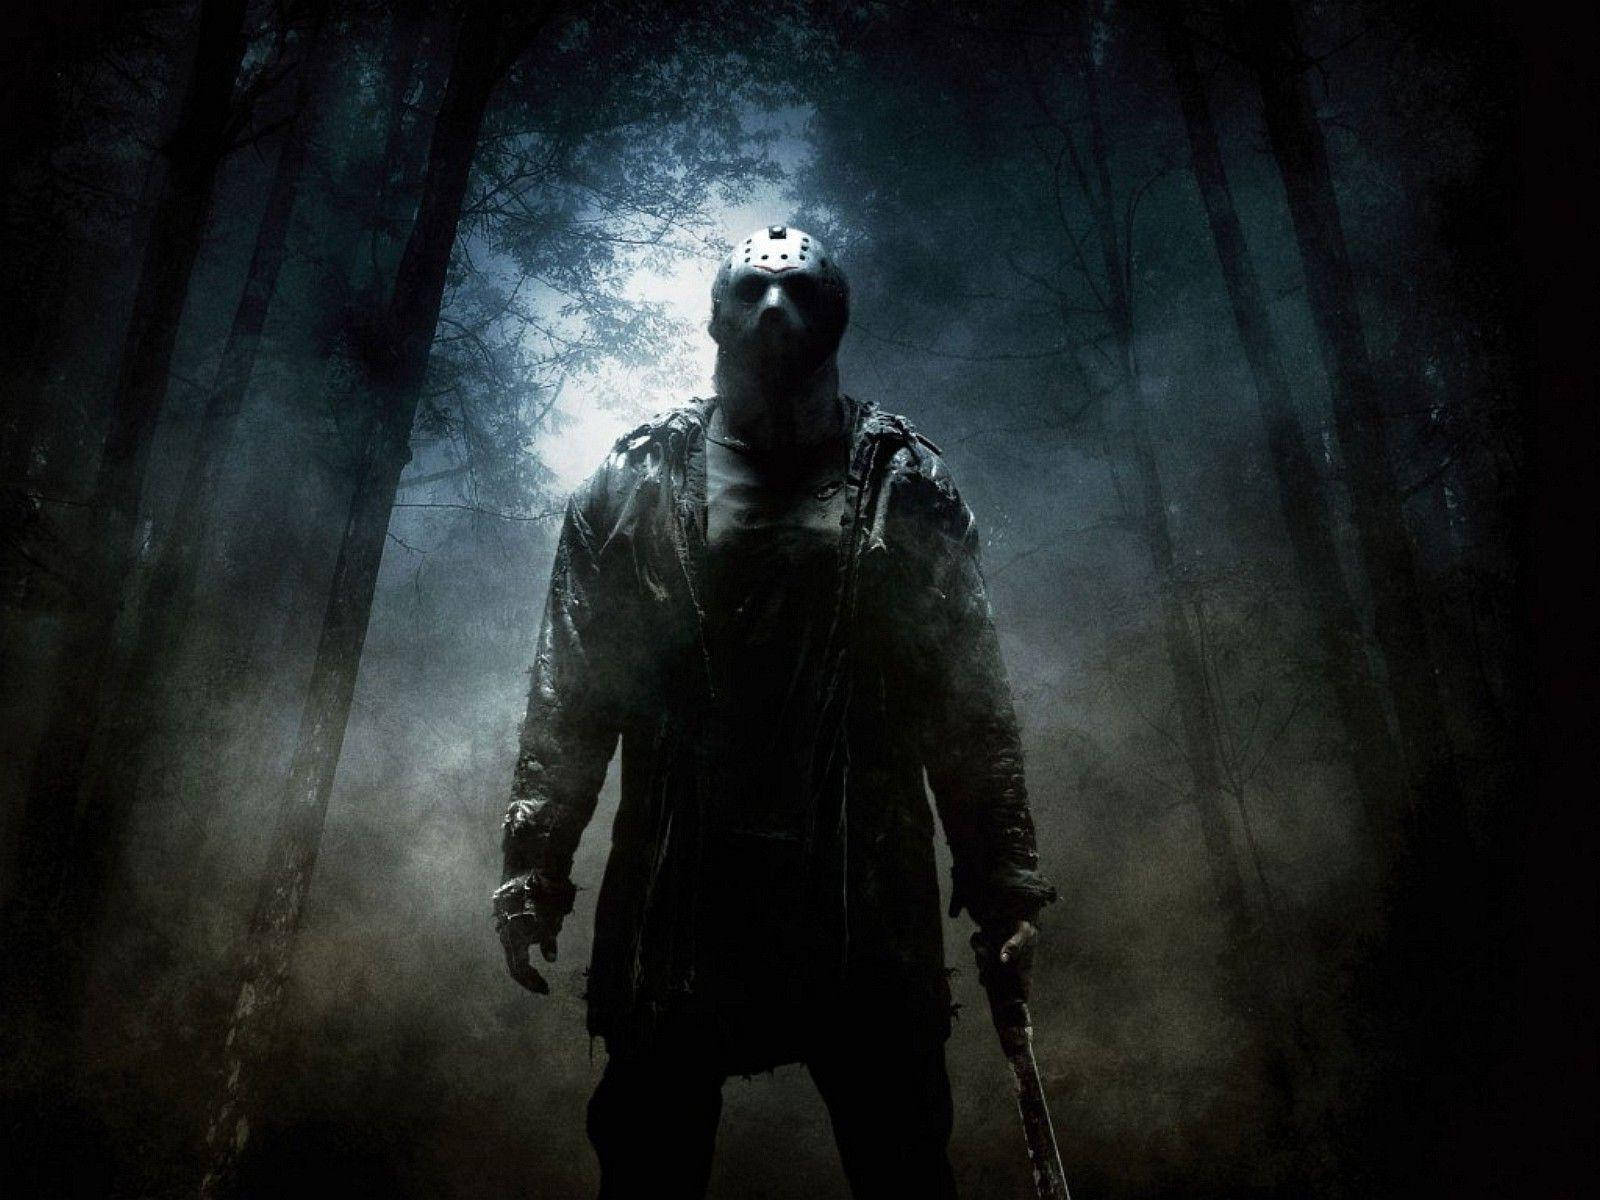 Top 999+ Friday The 13th Wallpaper Full HD, 4K✅Free to Use